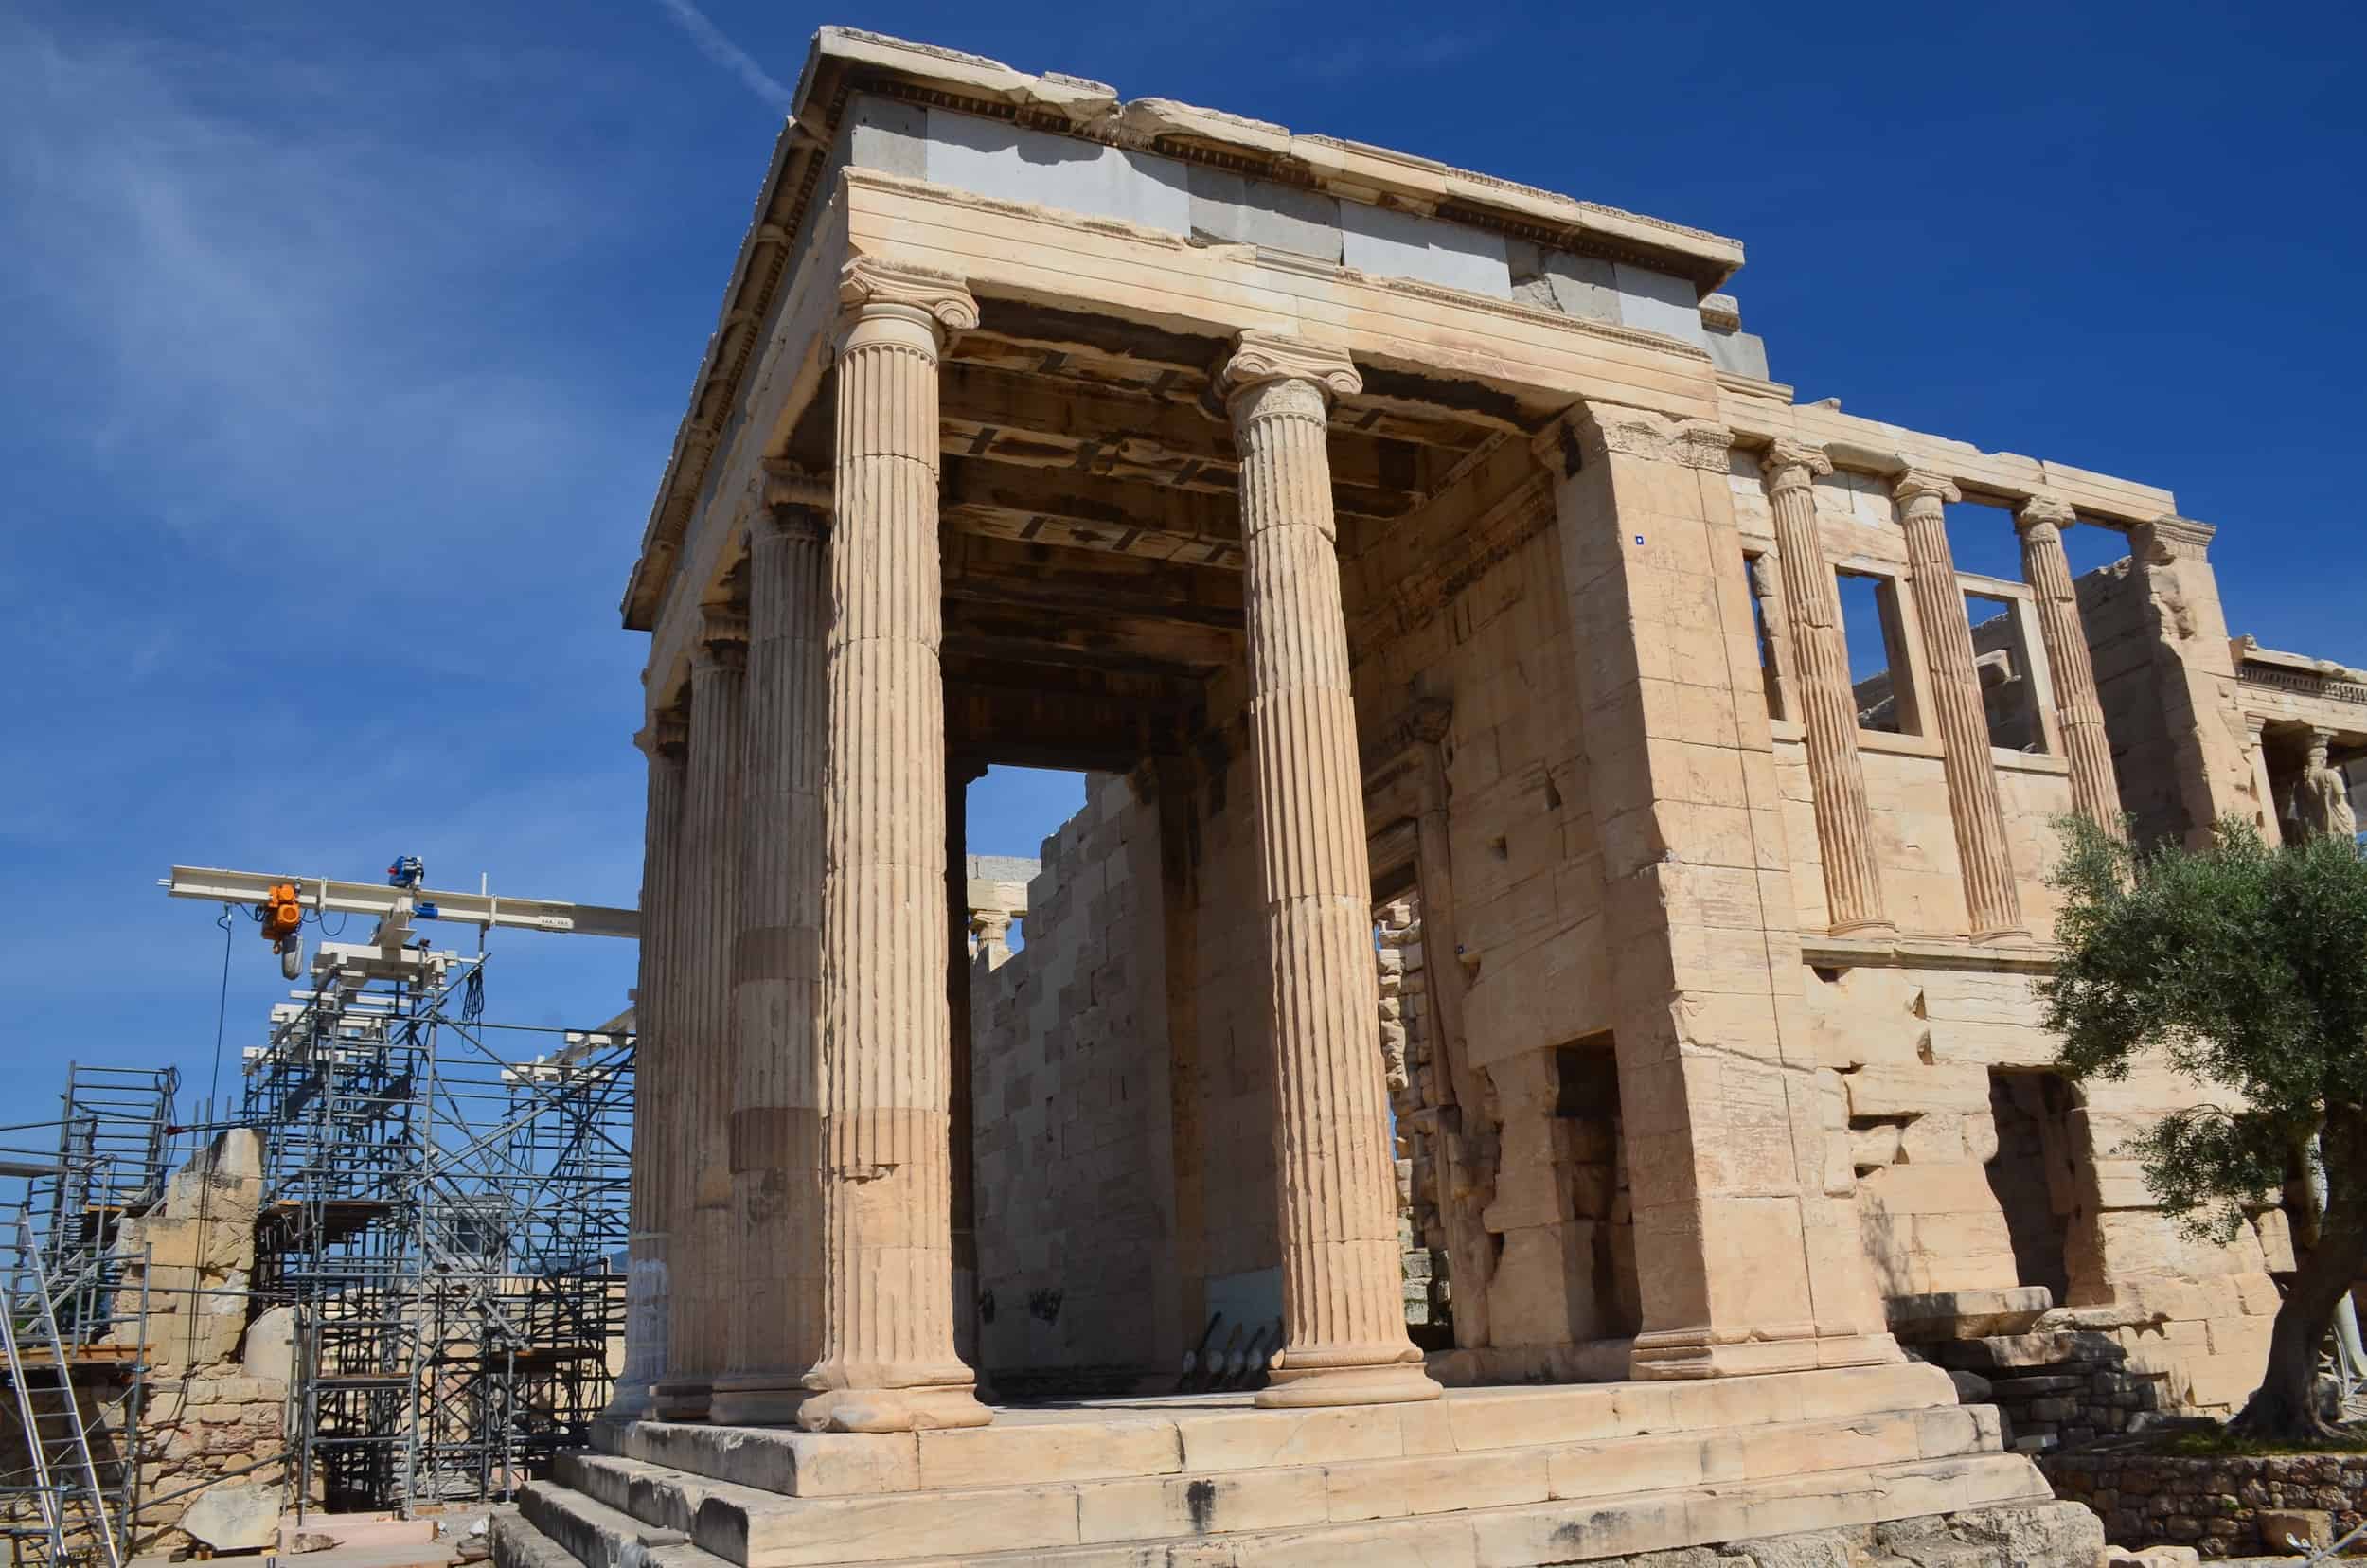 North porch of the Erechtheion on the Acropolis in Athens, Greece